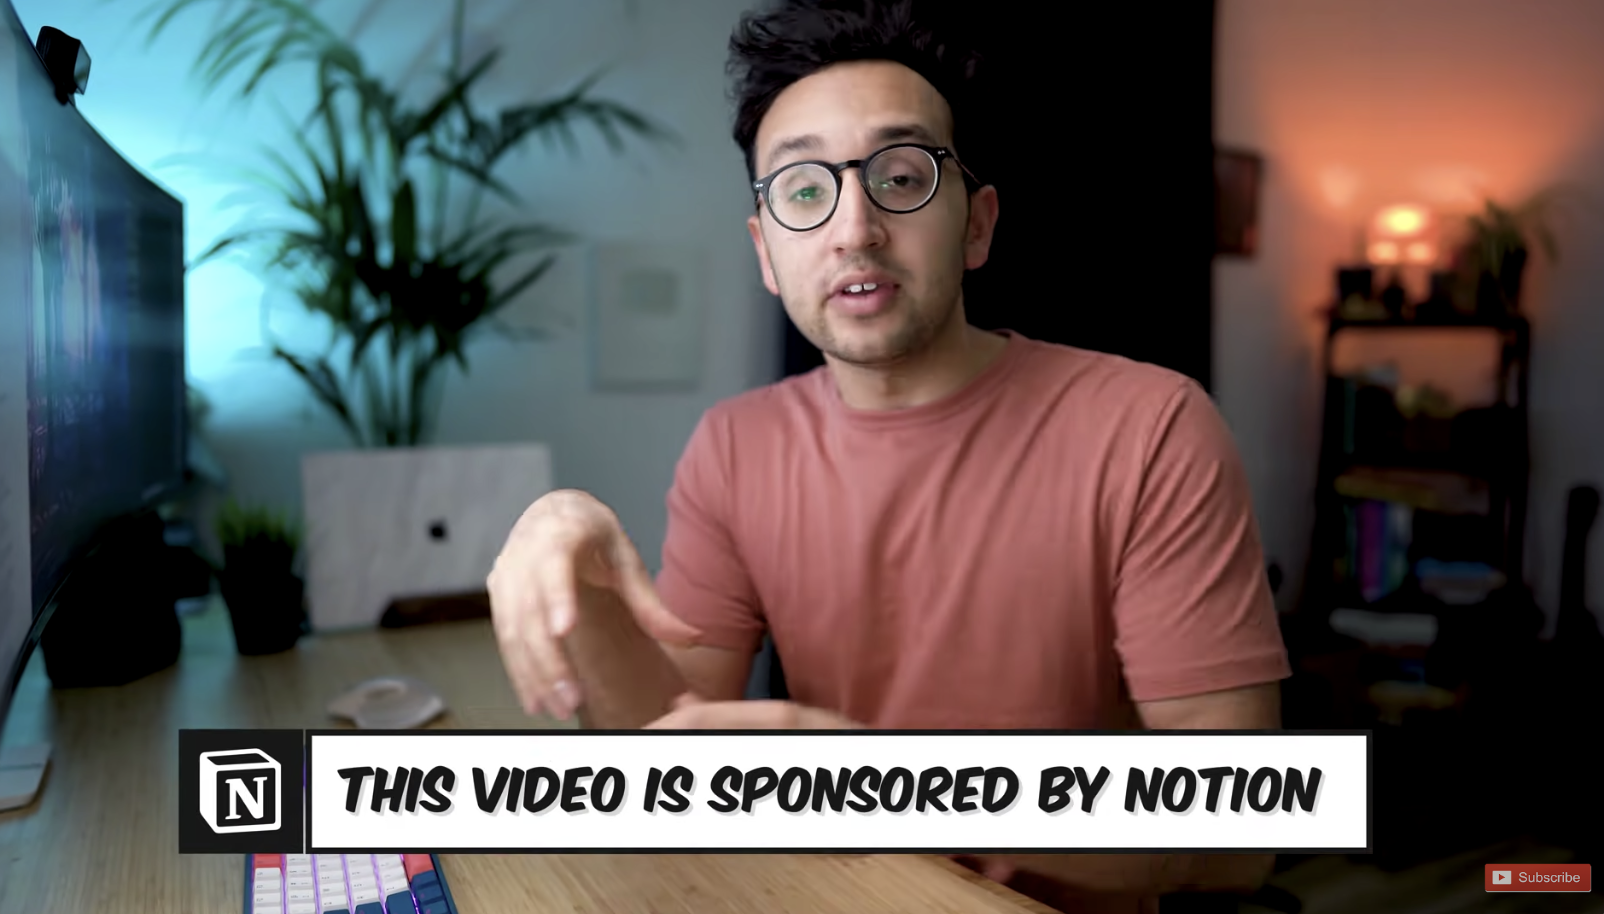 Screenshot from Ali Abdaal's YouTube video promoting Notion